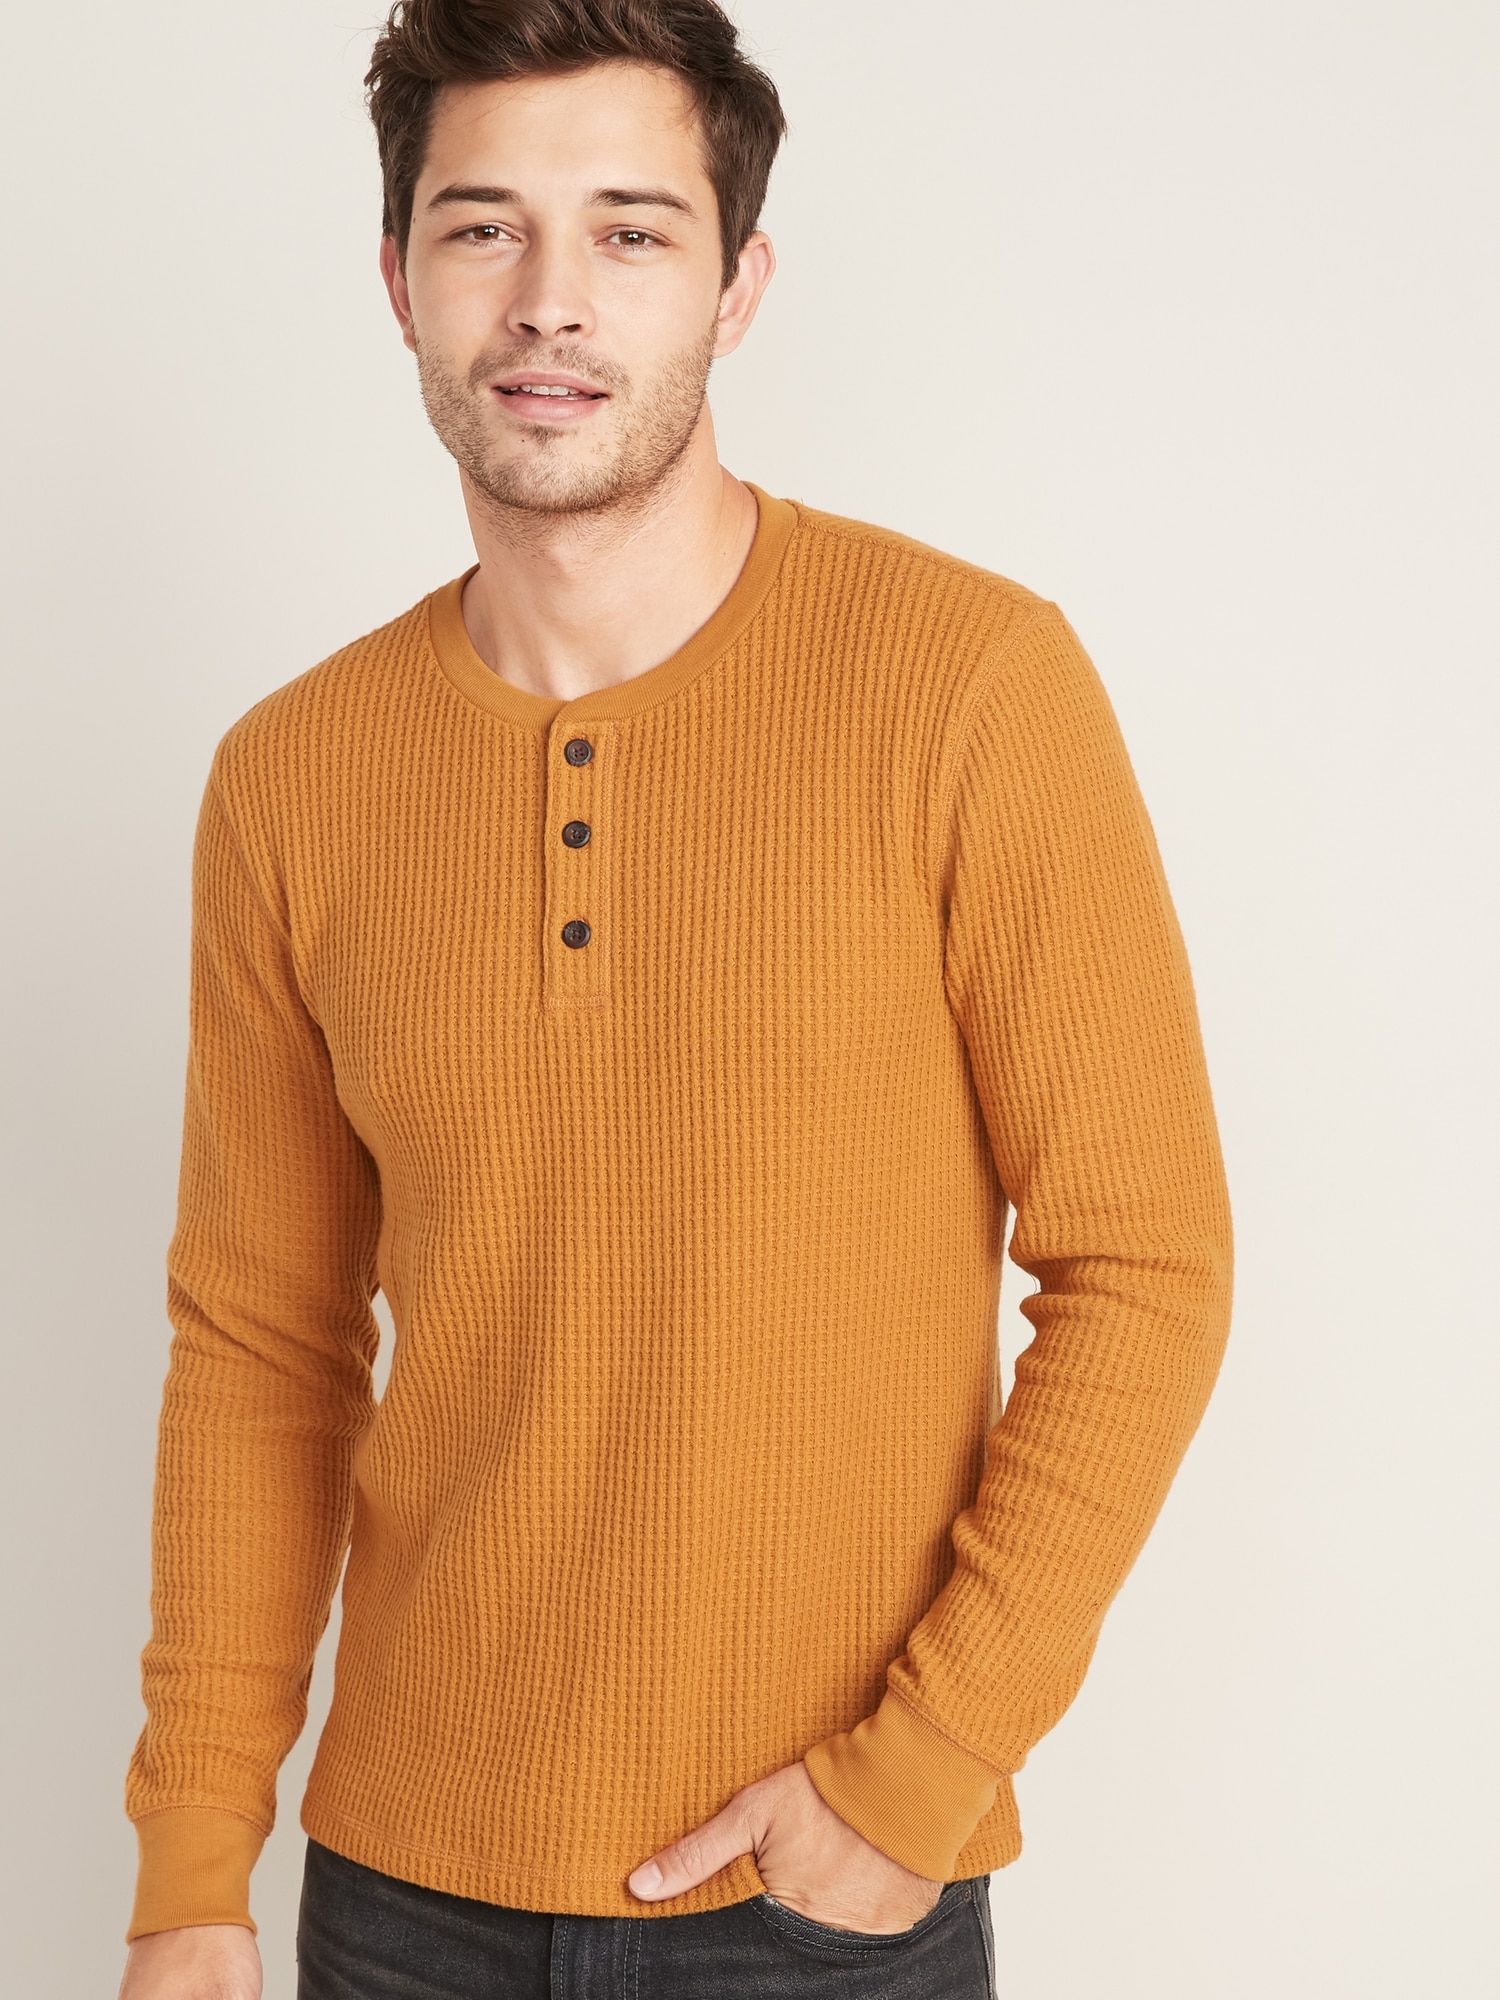 Chunky Thermal-Knit Built-In Flex Henley for Men | Old Navy